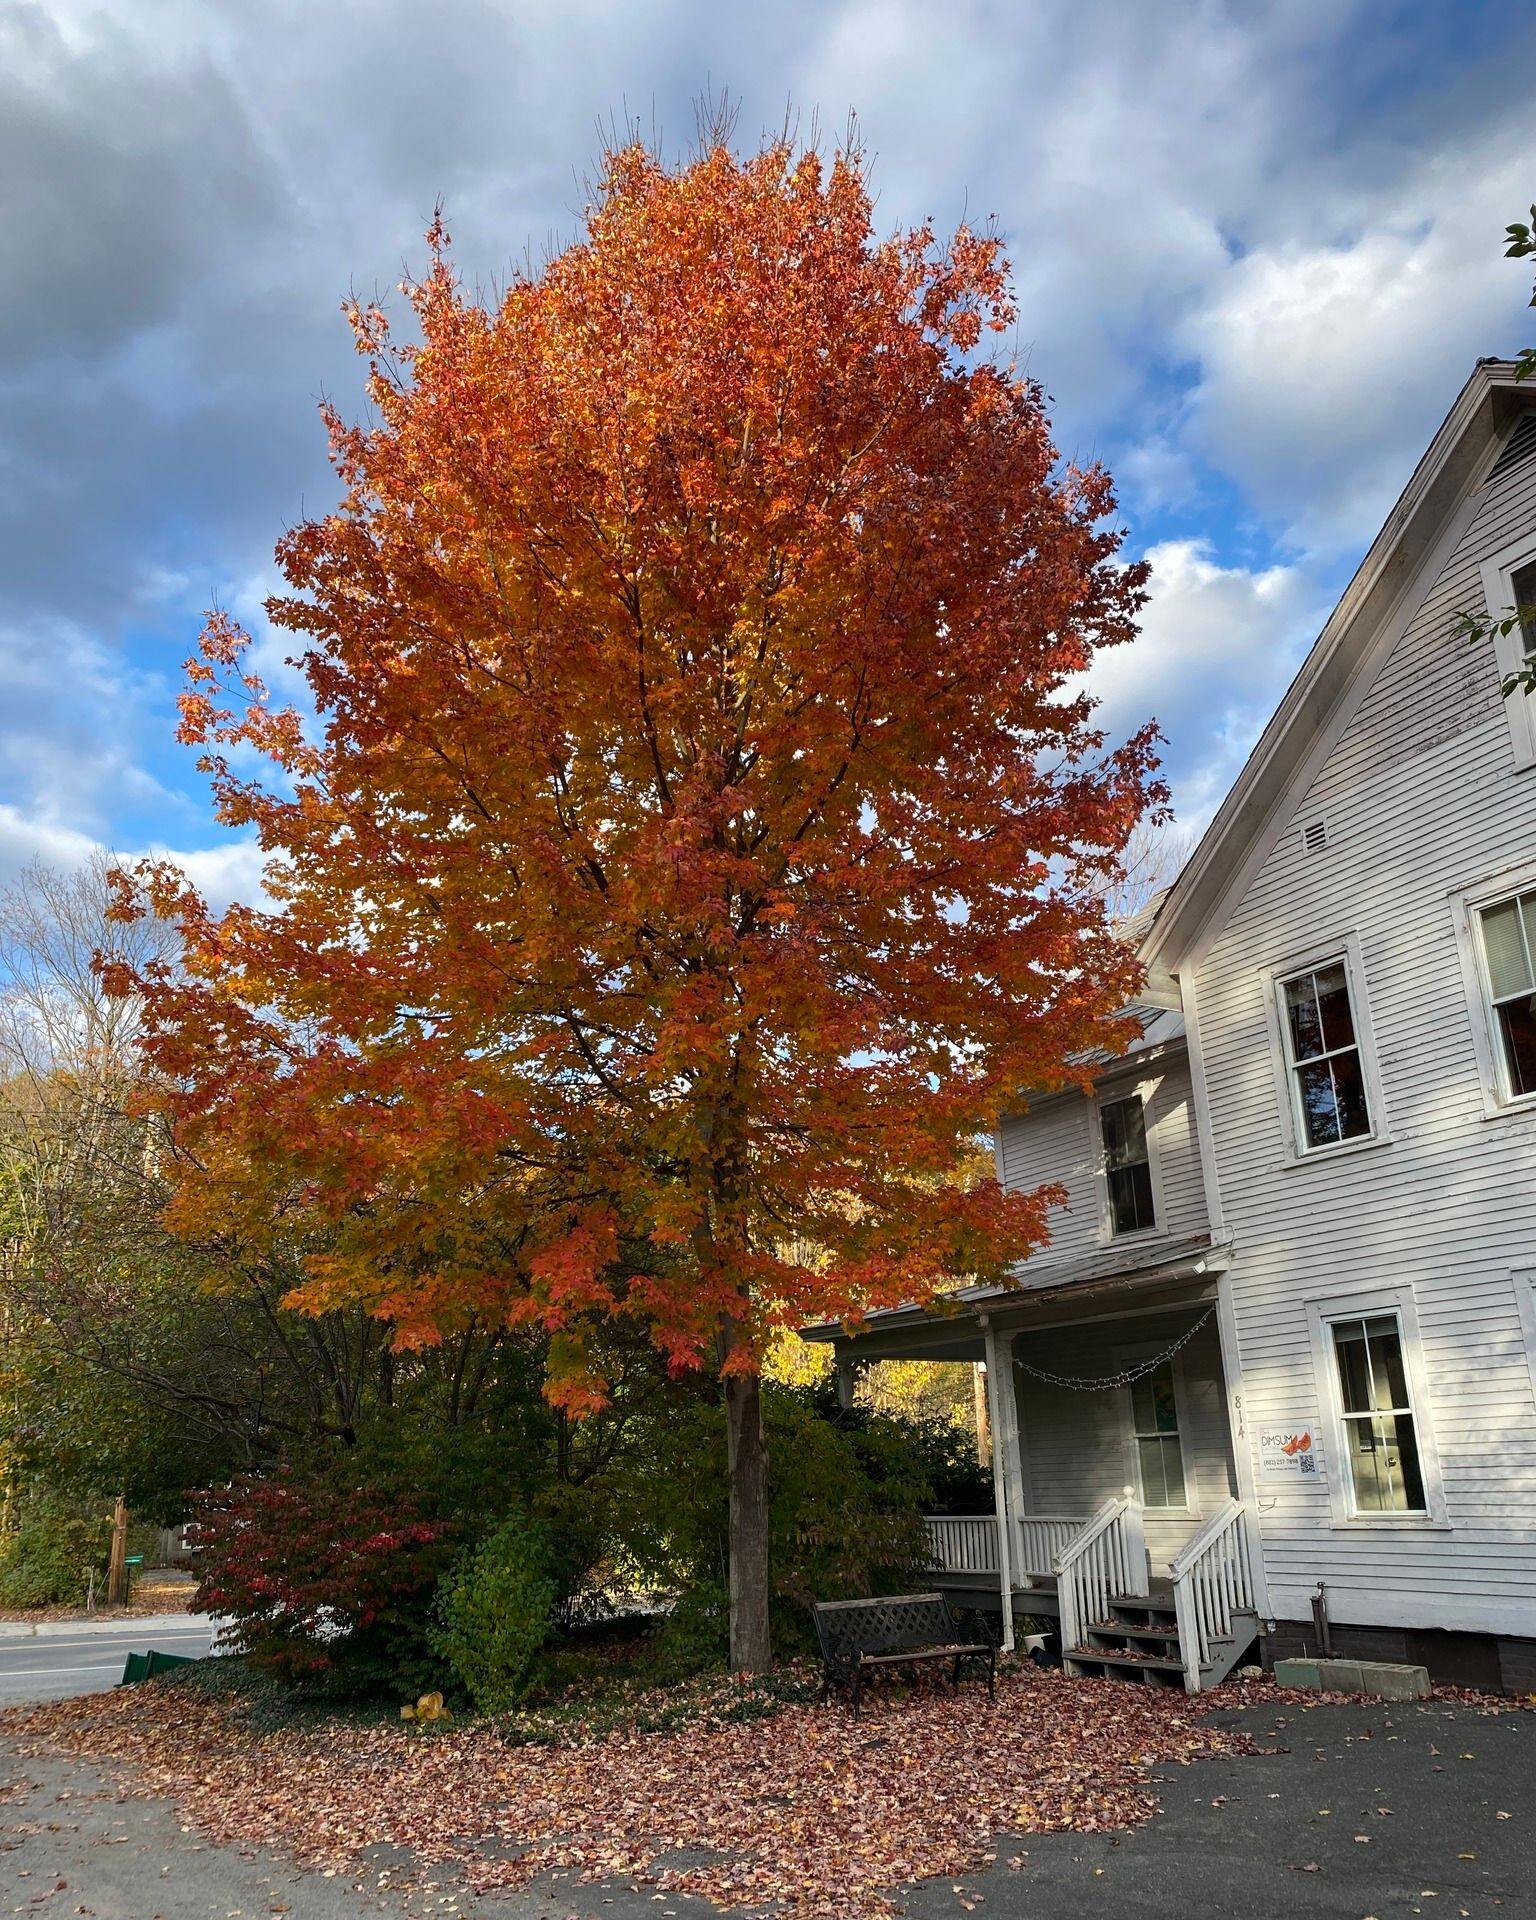 Our beautiful maple tree was planted 17 years ago. It has been a pleasure to watch it grow and change throughout the seasons. We love living in Vermont! The sights and colors of the autumn with gently falling leaves and the smell of rain are amongst 